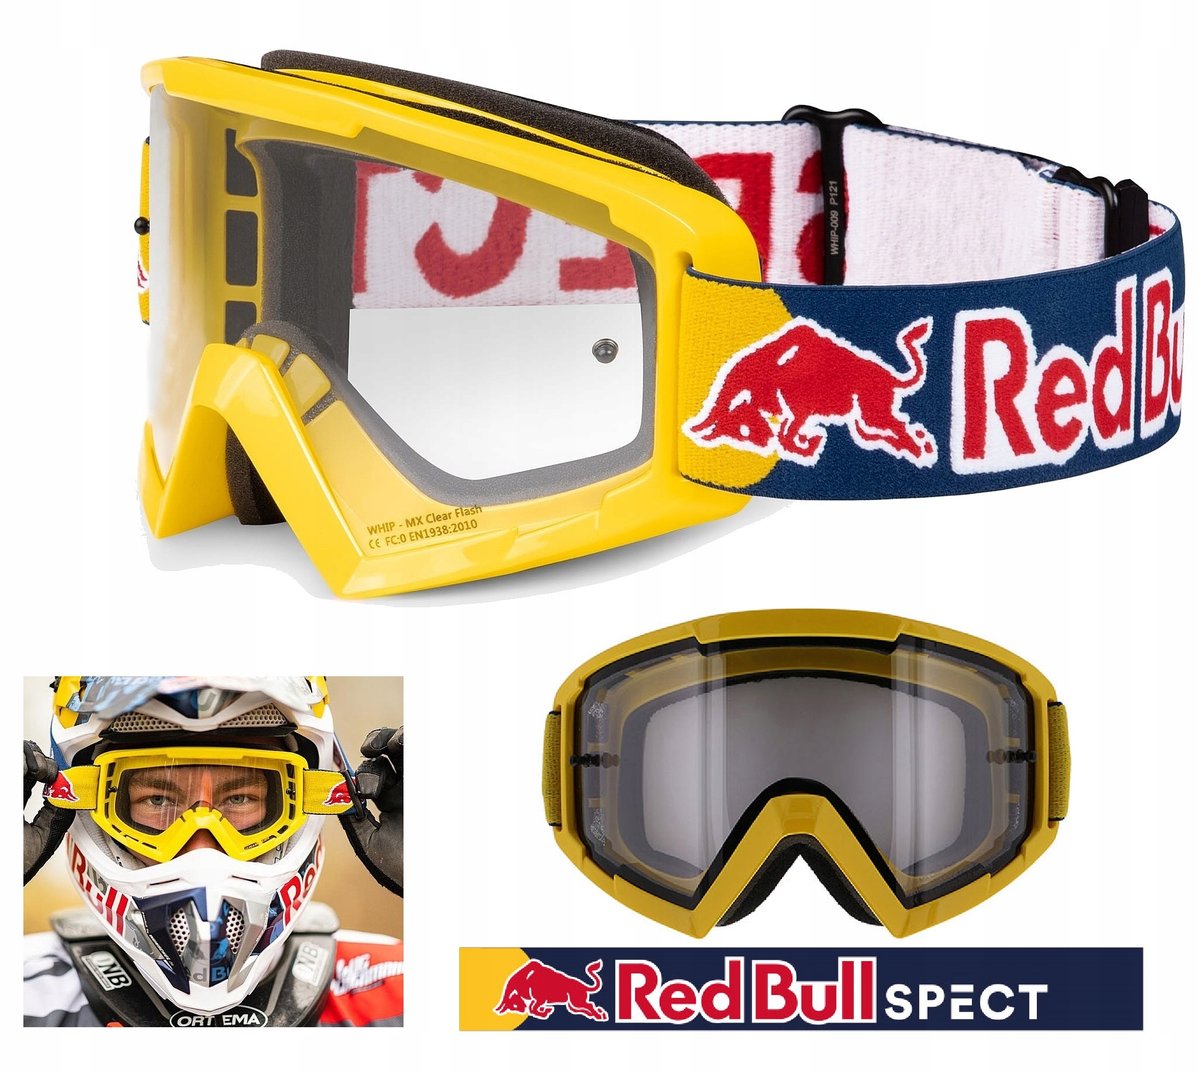 REDBULL SPECT SPECT Whip Goggles with Nose Guard, żółty/niebieski 2021 Gogle WHIP-009